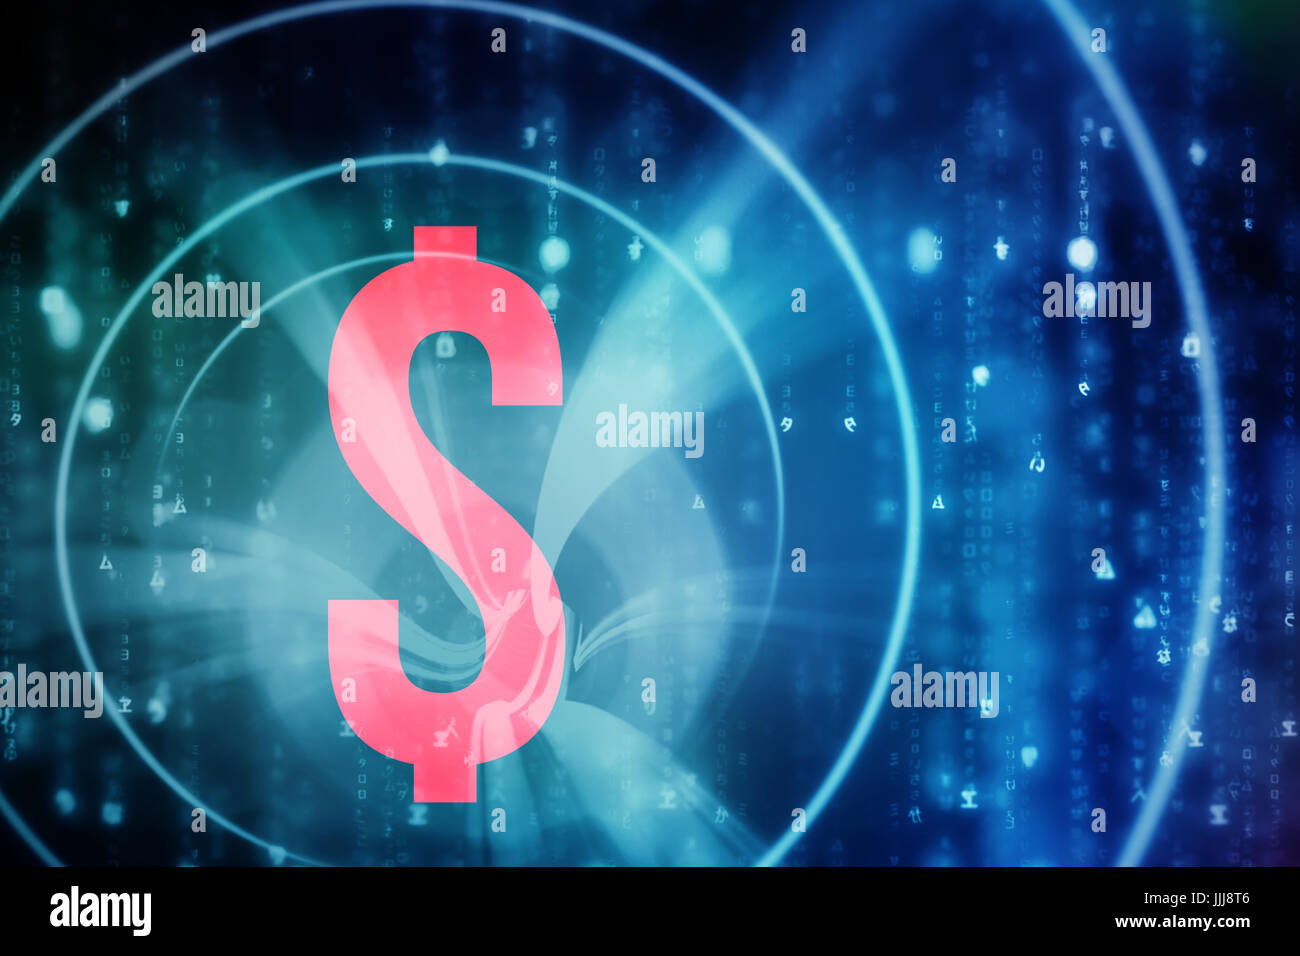 Composite 3d image of dollar sign Stock Photo